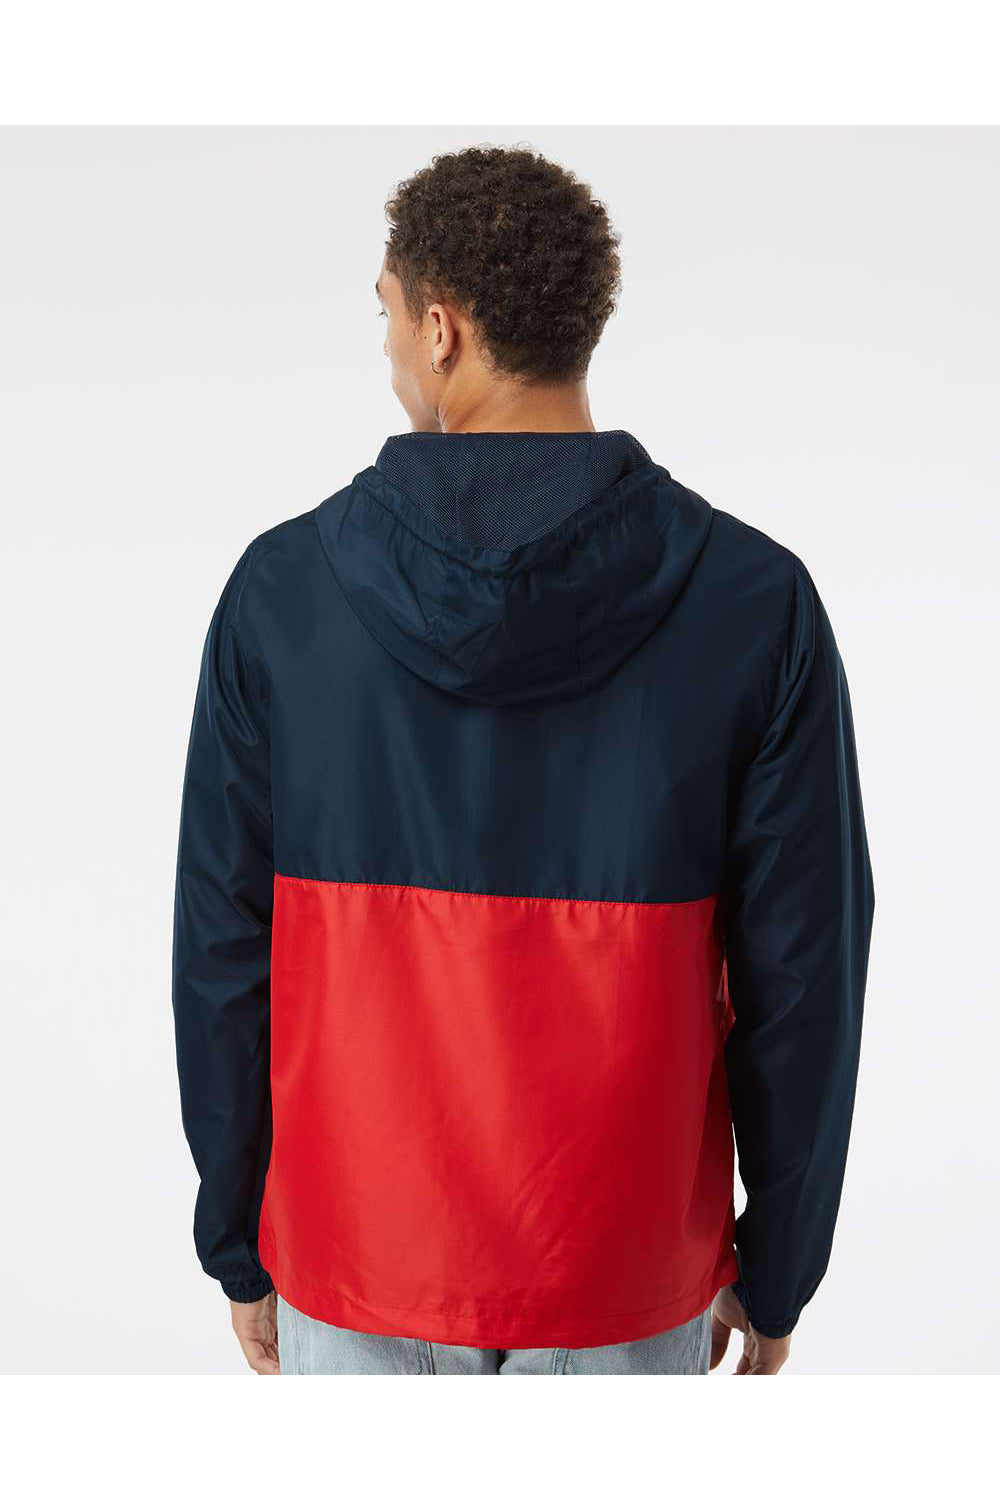 Independent Trading Co. EXP54LWP Mens 1/4 Zip Windbreaker Hooded Jacket Classic Navy Blue/Red Model Back